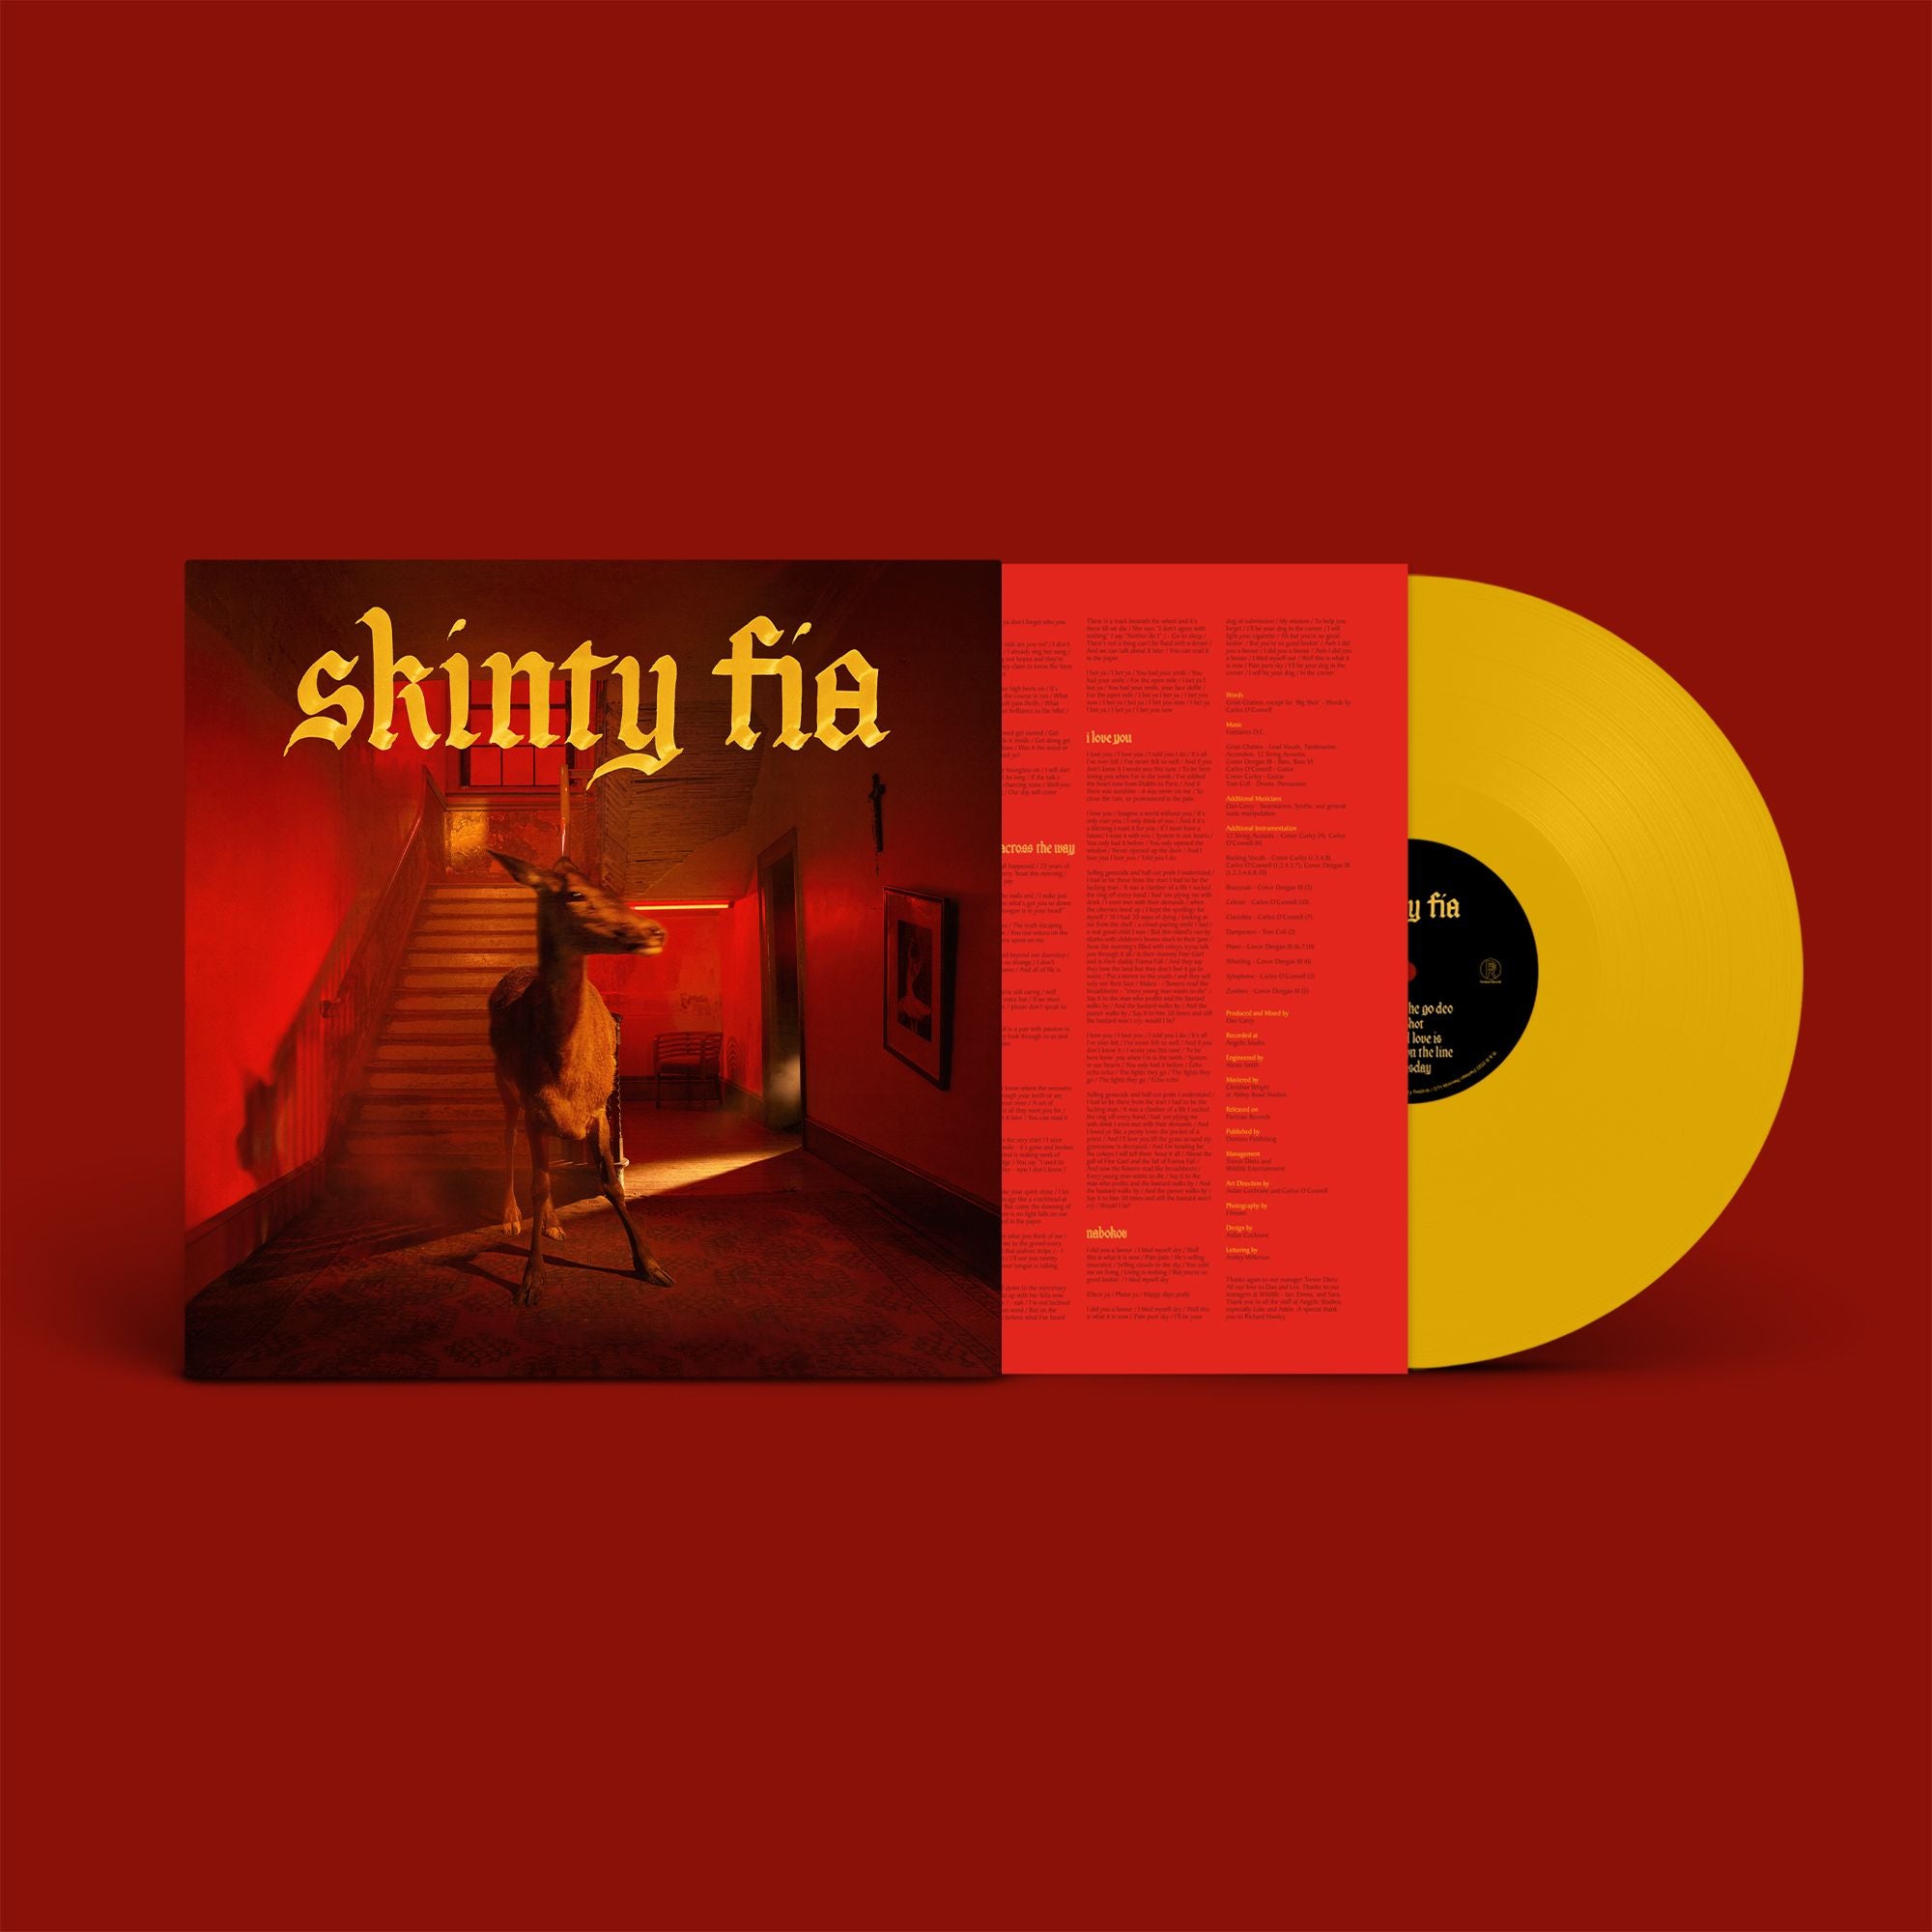 Fontaines D.C. ‎– Skinty Fia YELLOW COLOURED VINYL LP (LIMITED EDITION)